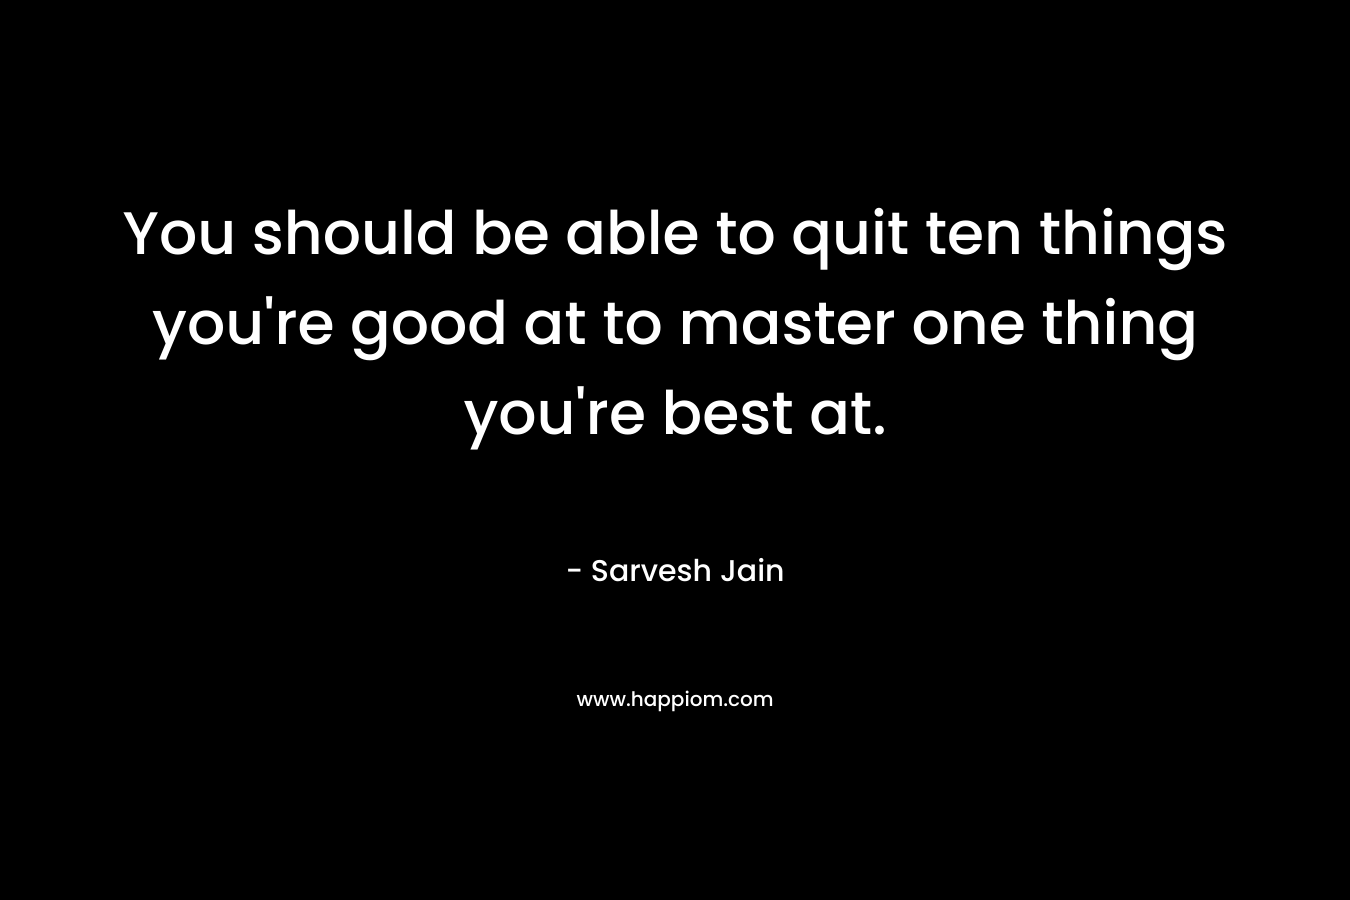 You should be able to quit ten things you’re good at to master one thing you’re best at. – Sarvesh Jain